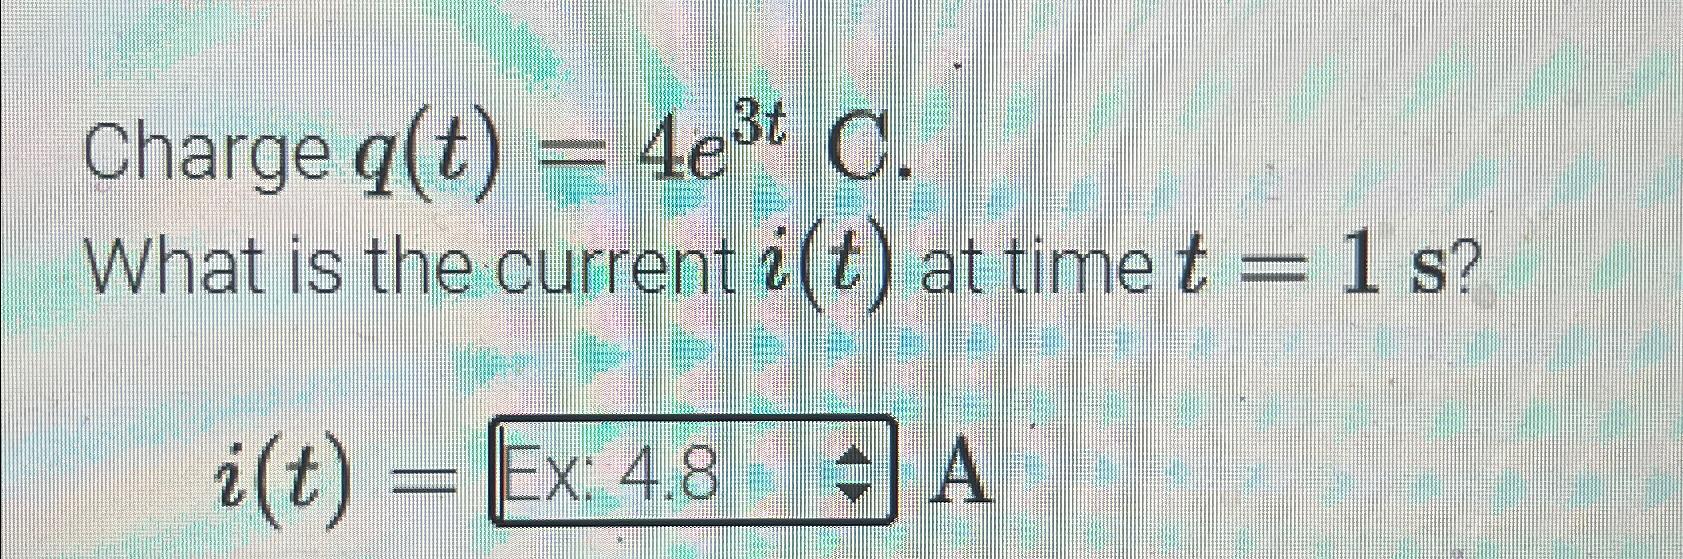 Charge q(t) = 4et C. What is the current i(t) at time t = 1 s? i(t)= Ex: 4.8 A